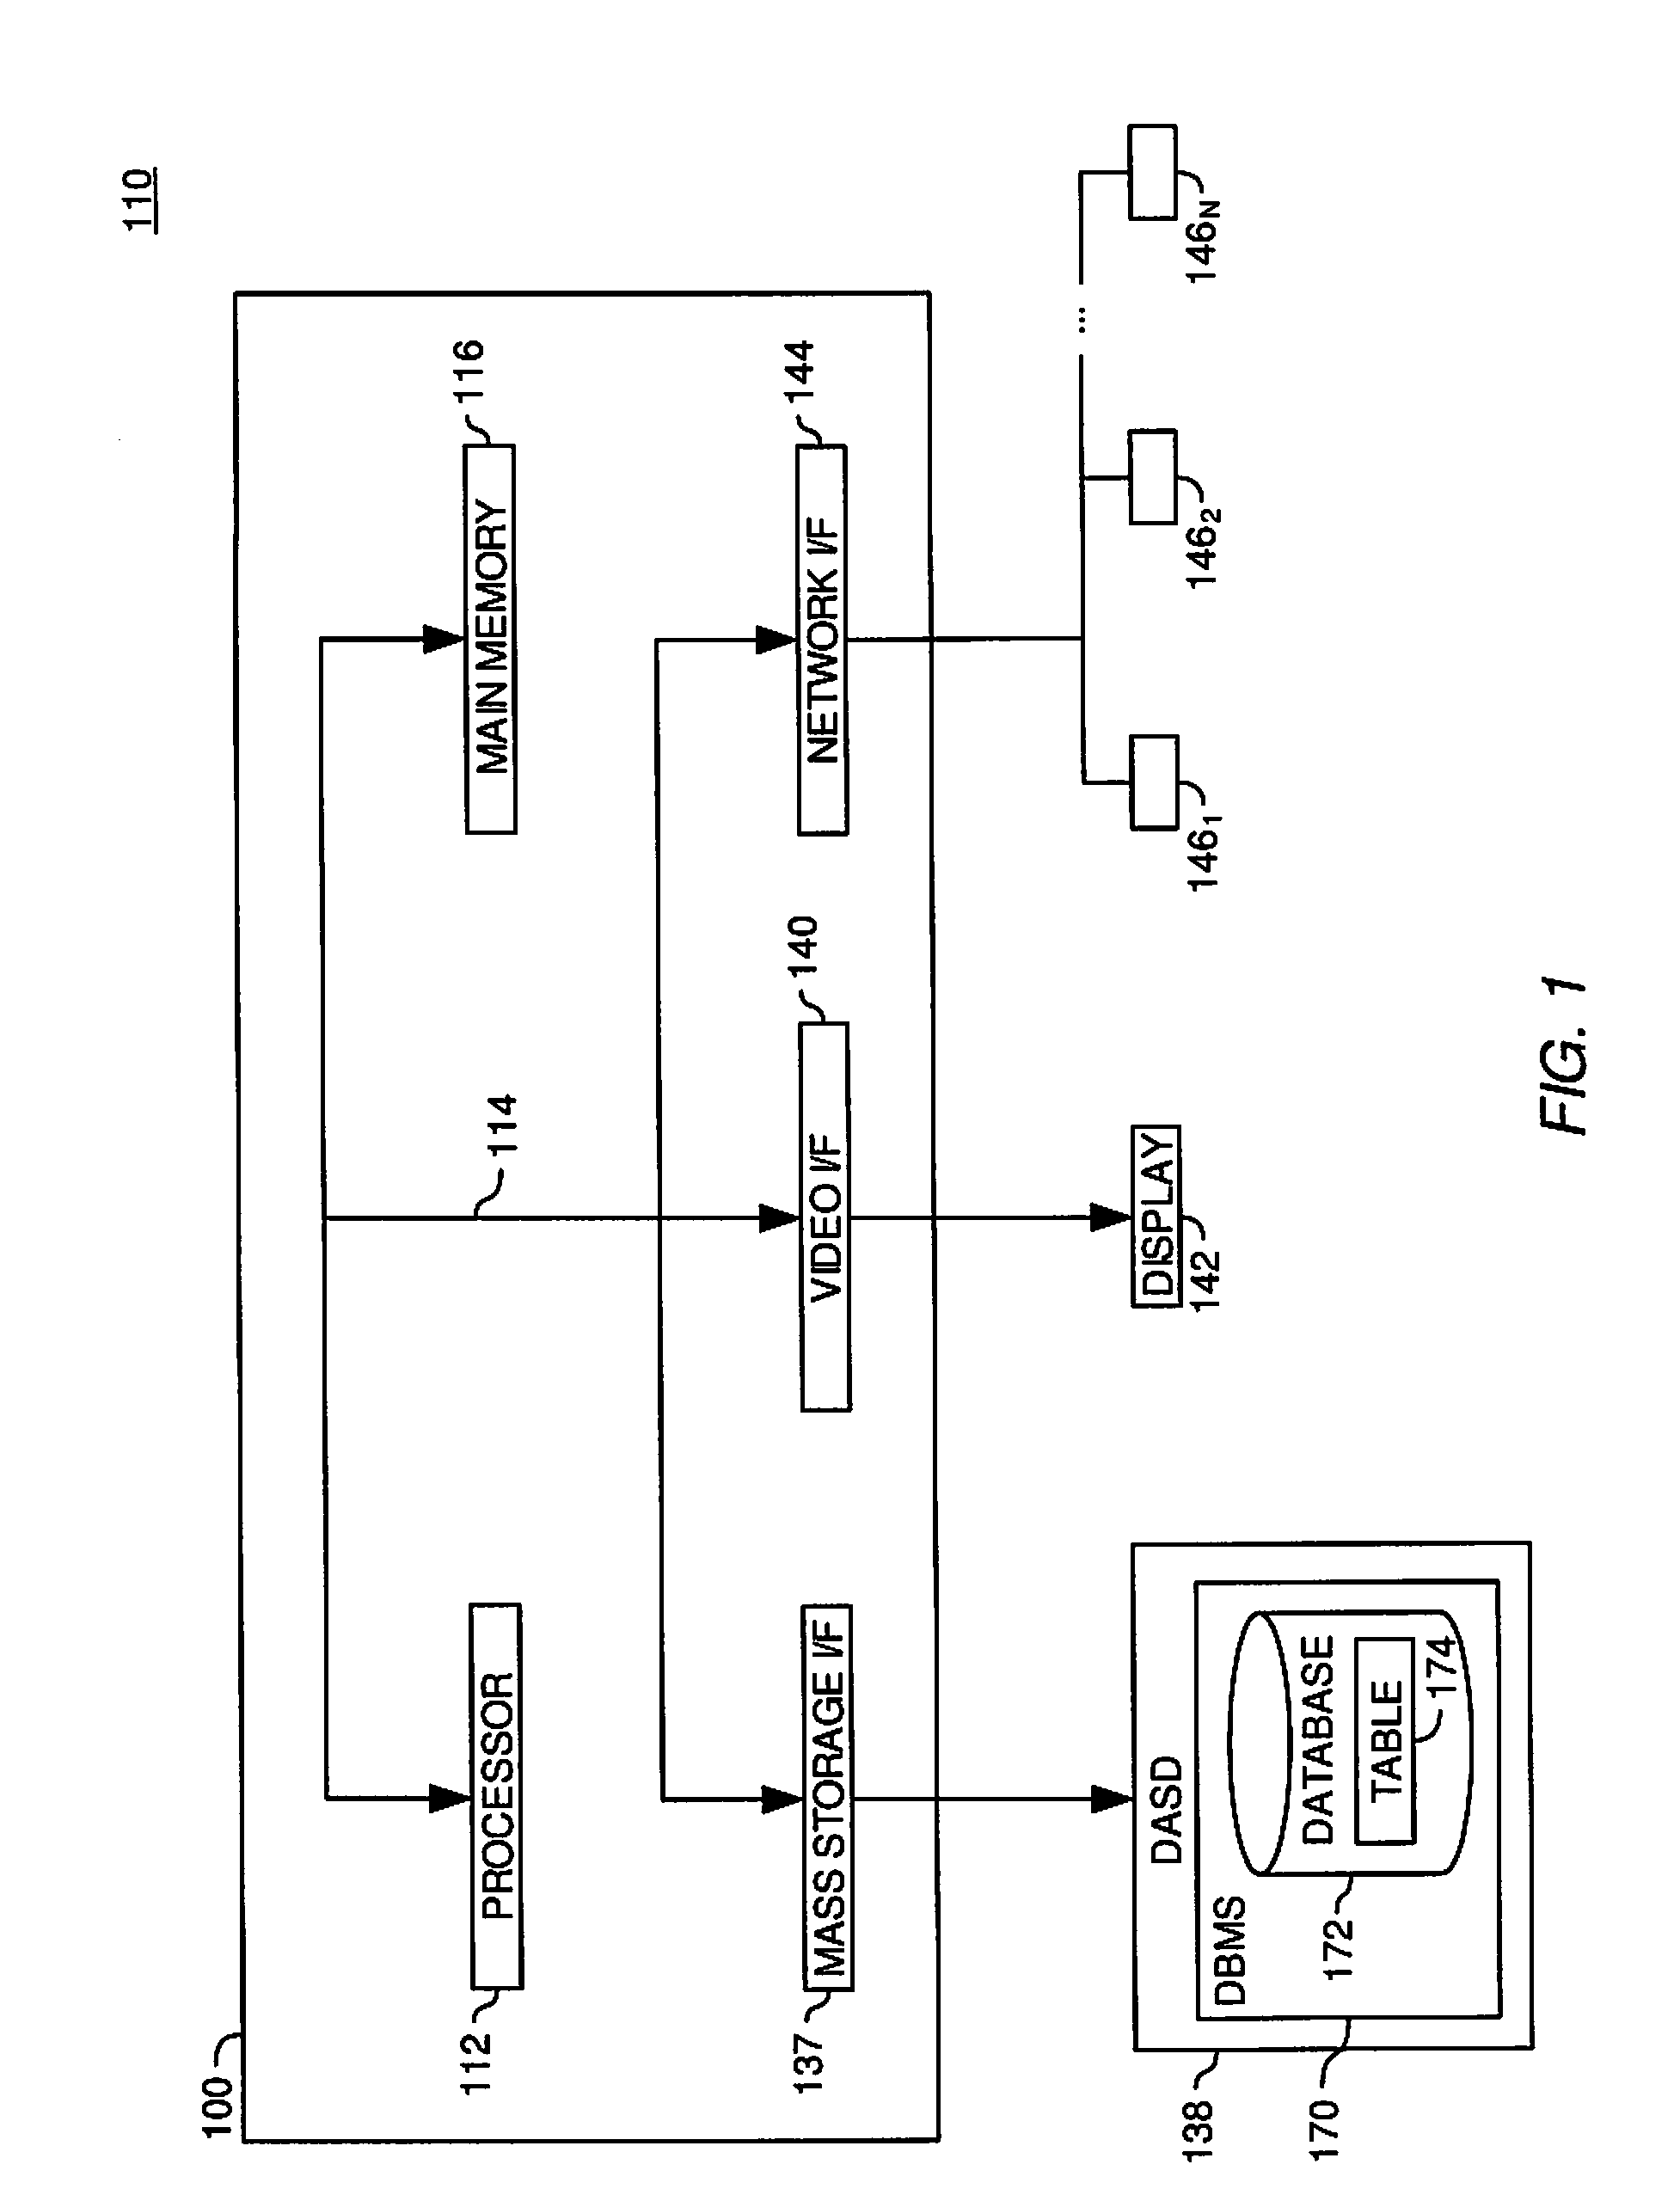 System and Method for Managing Execution of Queries Against Database Samples